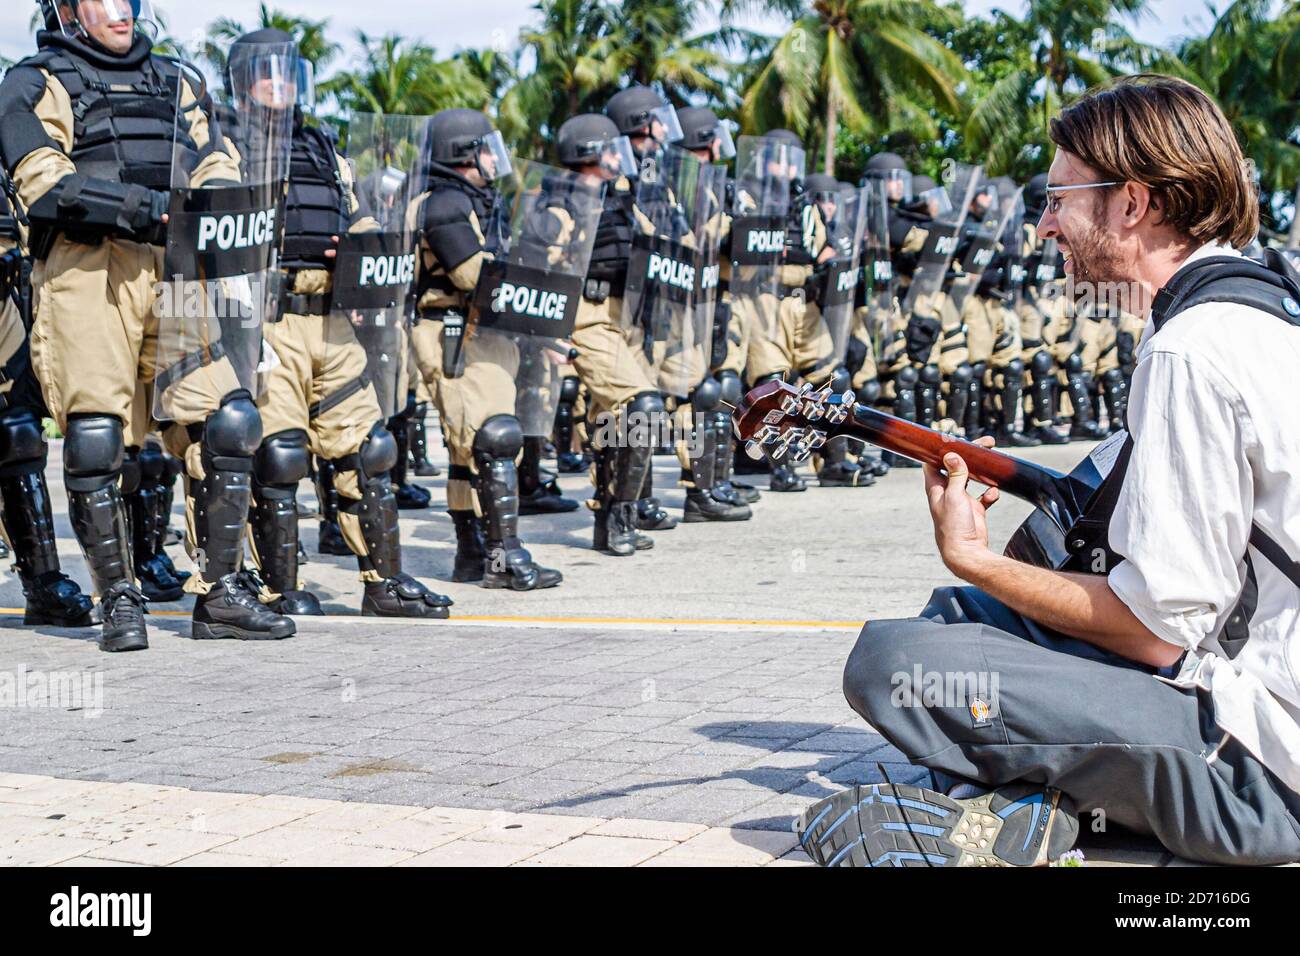 Miami Florida,Biscayne Boulevard,Free Trade Area of Americans Summit FTAA demonstrations,protester male student sitting police line riot gear shields Stock Photo